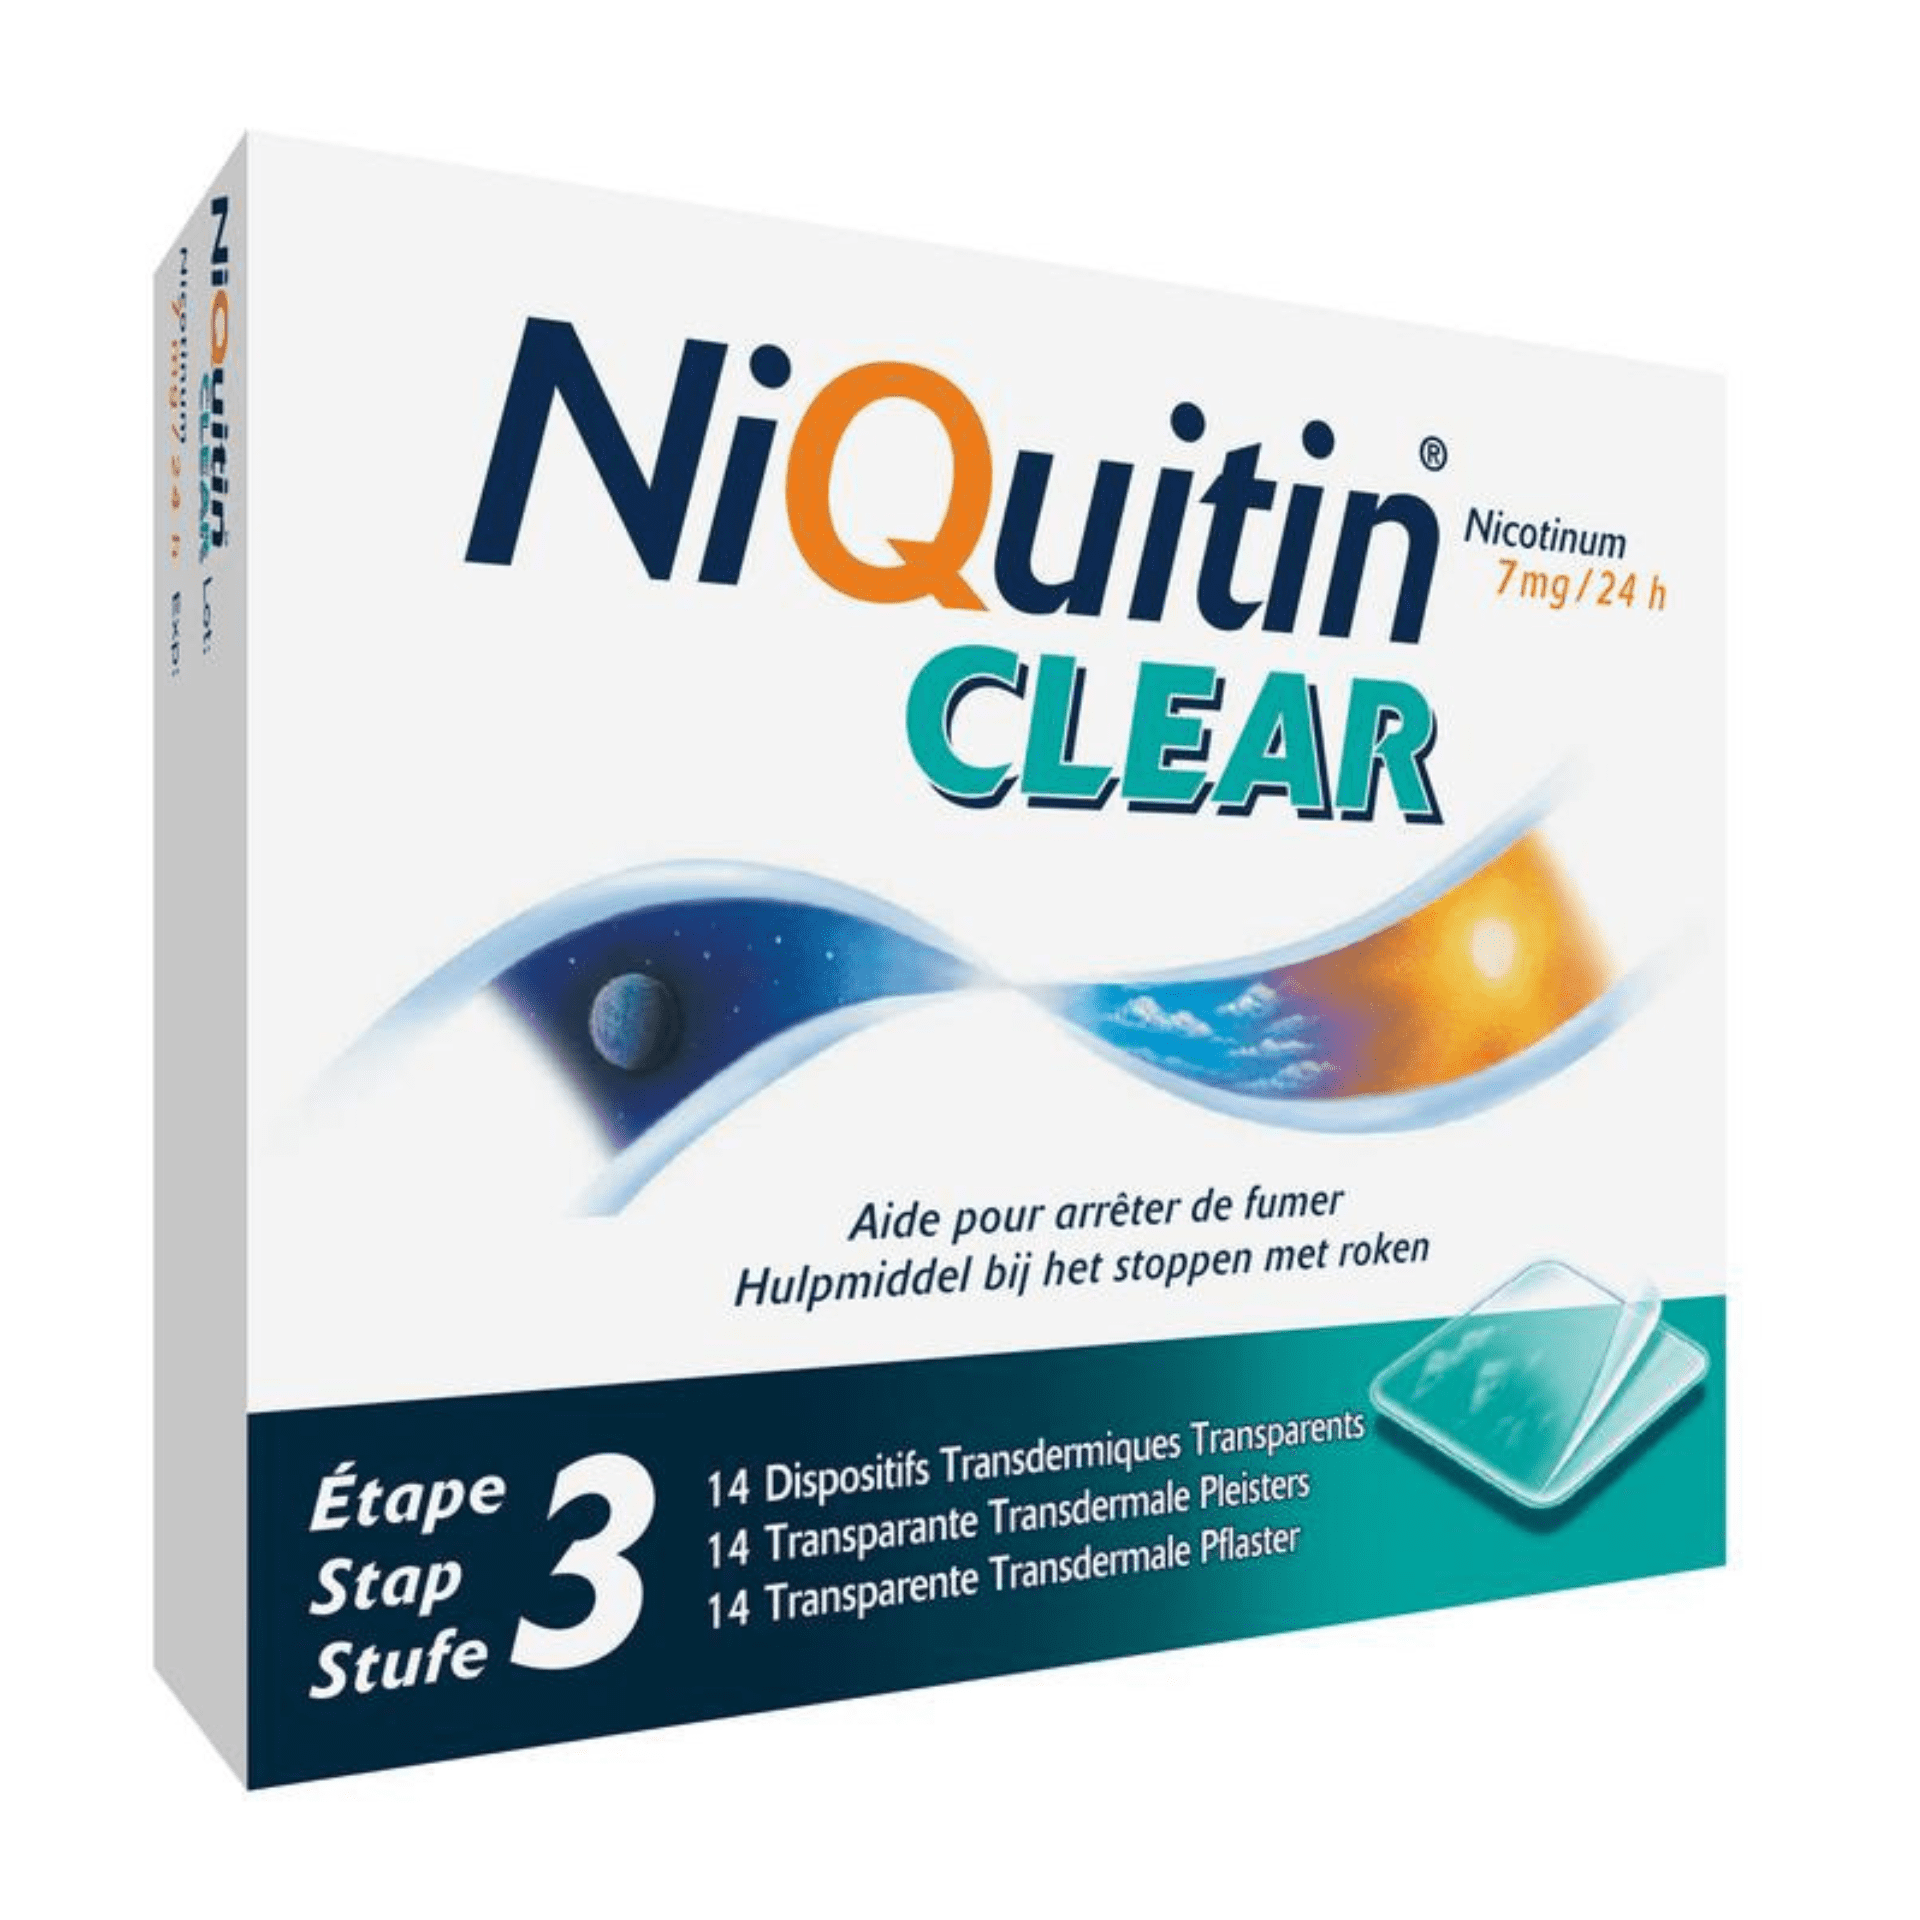 Niquitin Clear Patches 7 mg